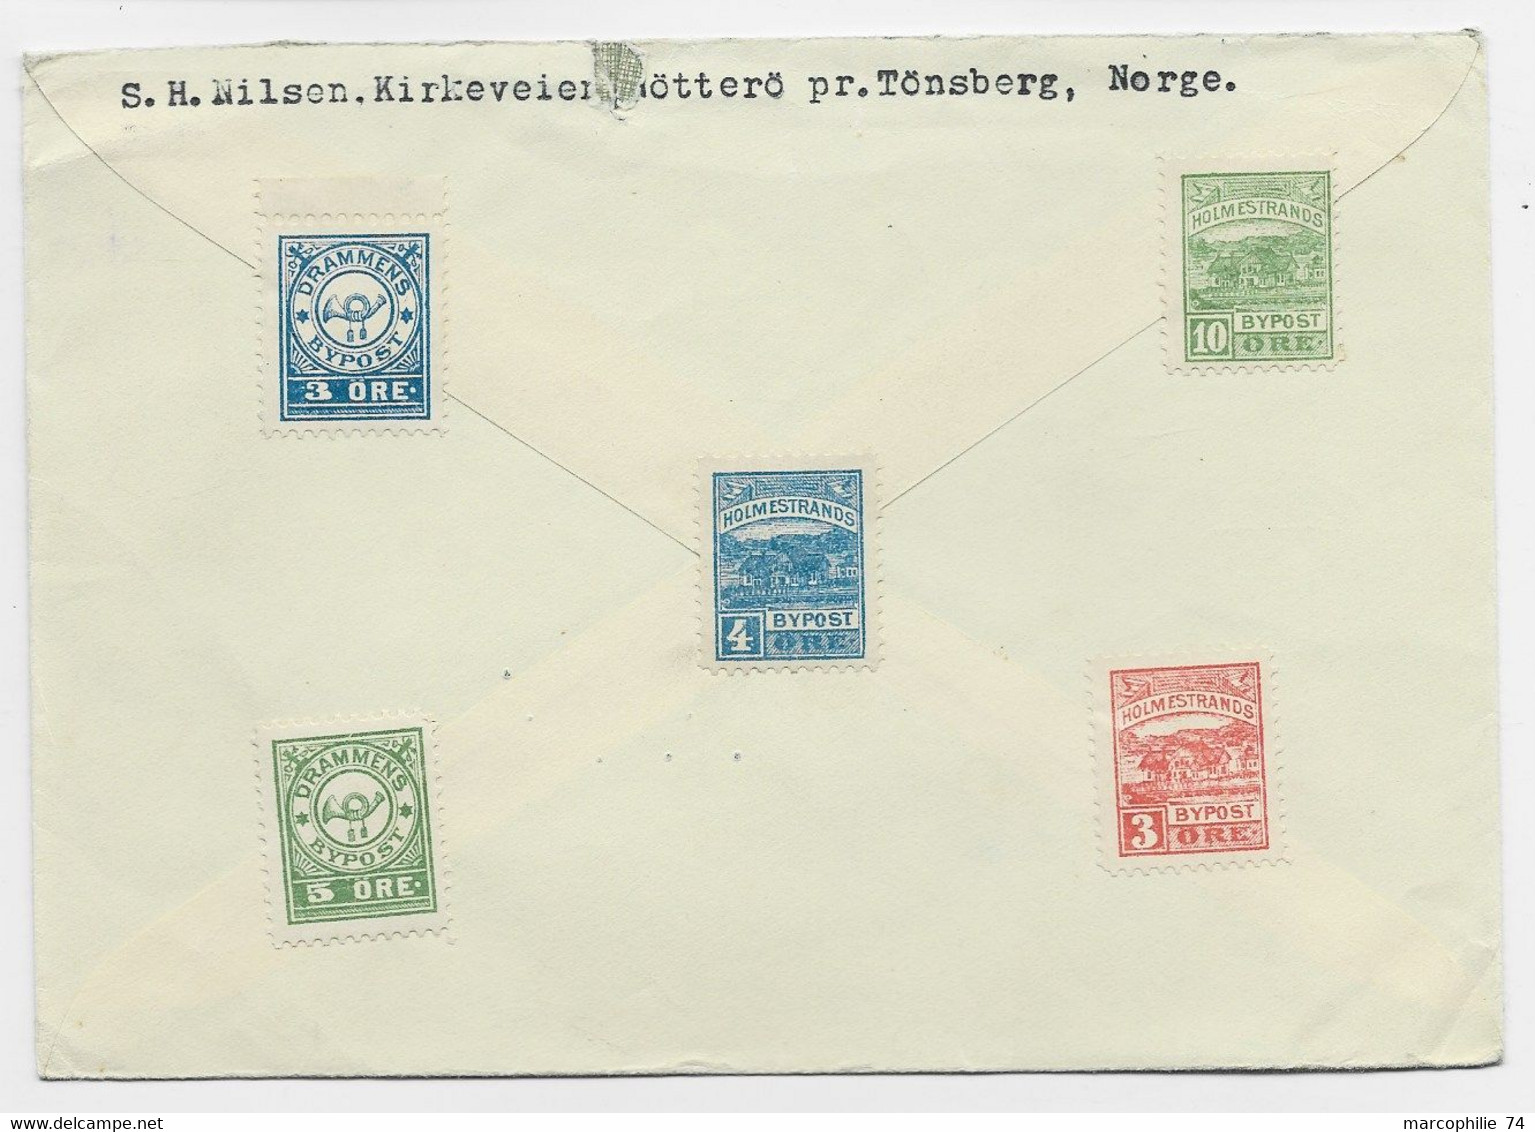 NORGE NORWAY LETTRE COVER TONSBERG 10.1.1955 TO USA - Storia Postale